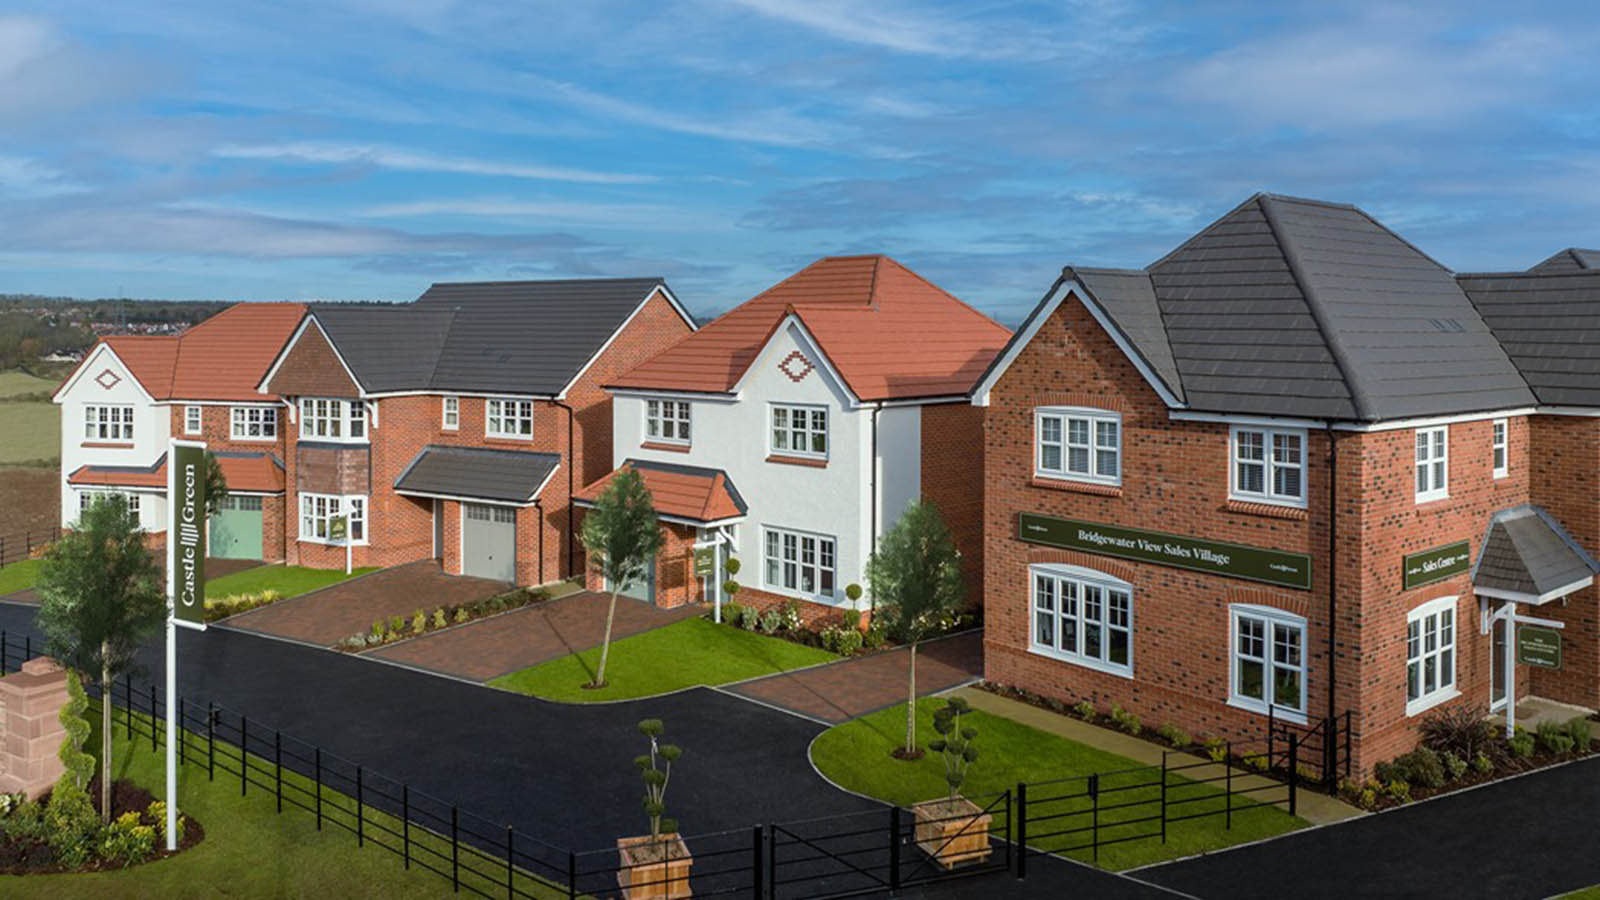 The show homes at Bridgewater View